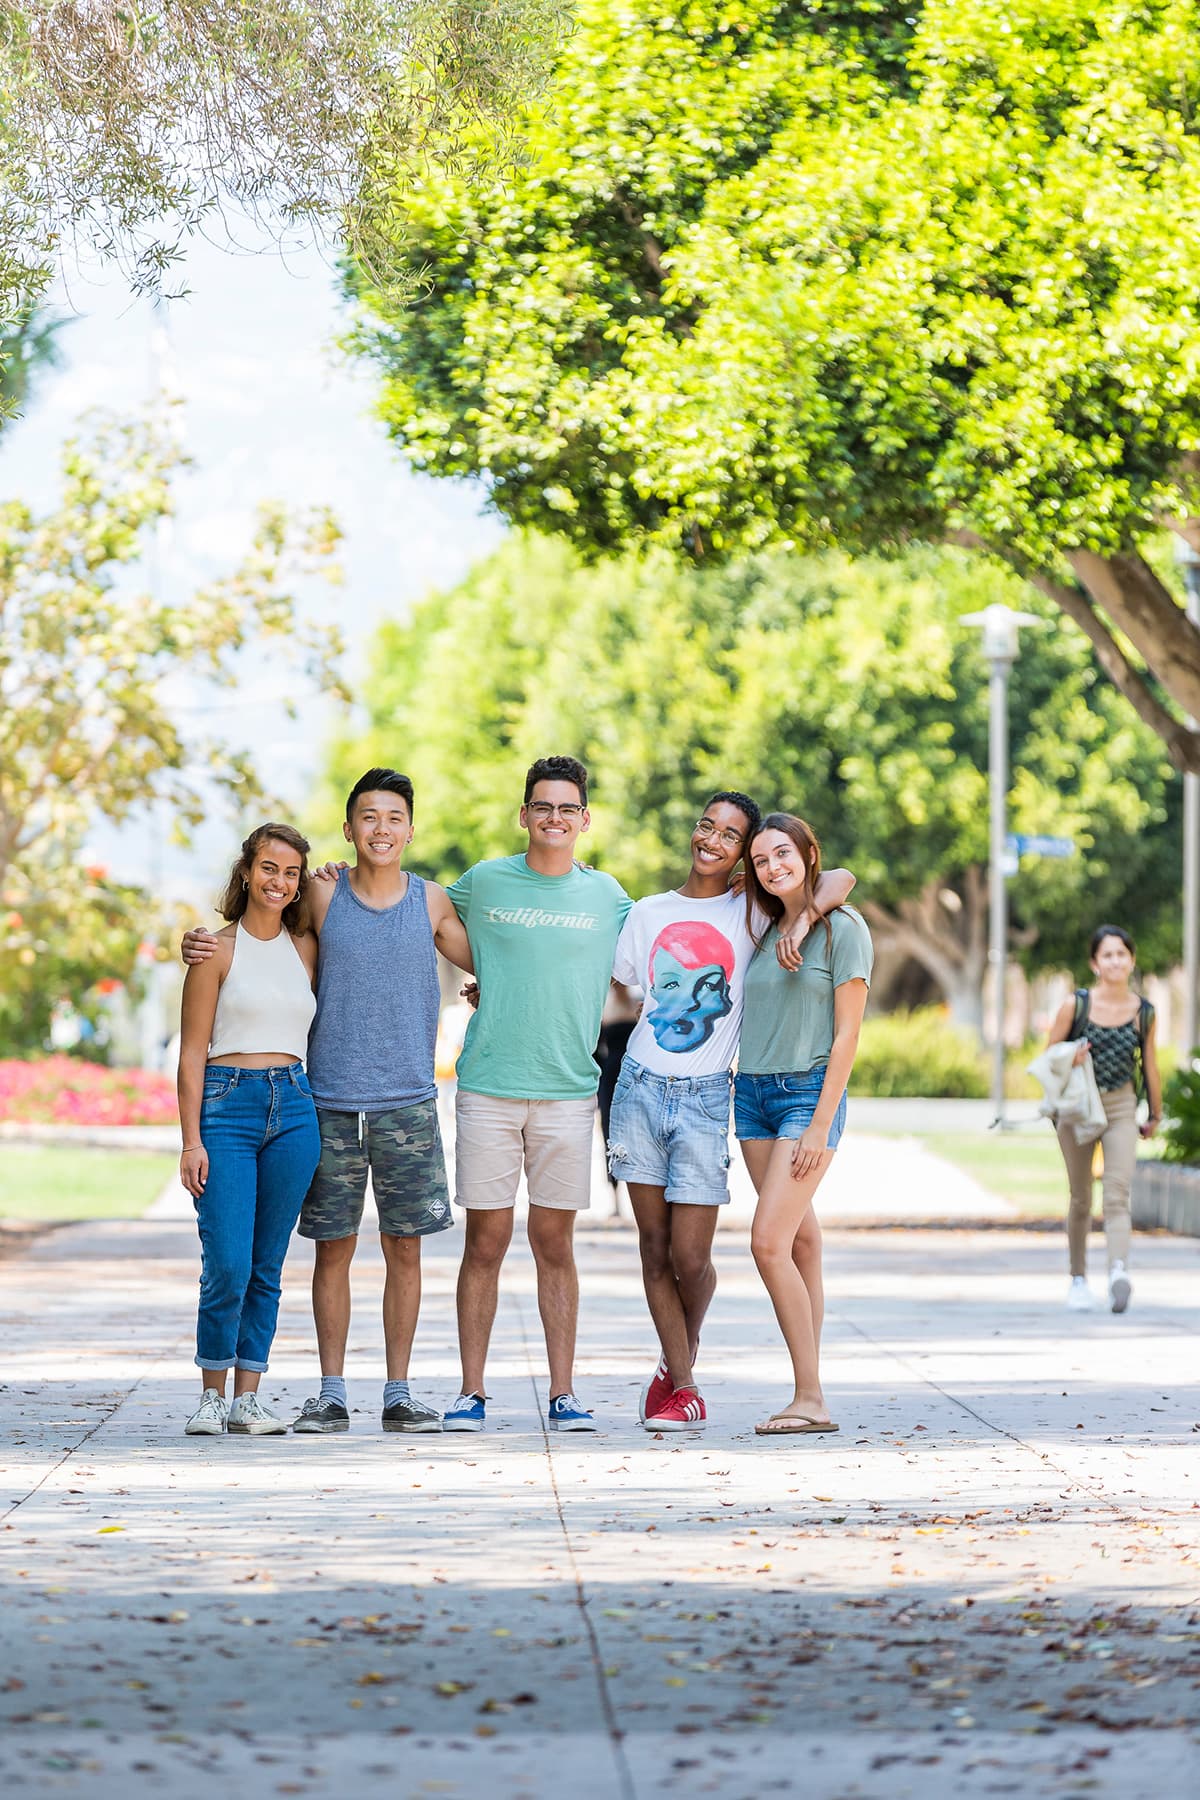 Five UCSB students outdoors with arms wrapped around each other's shoulders